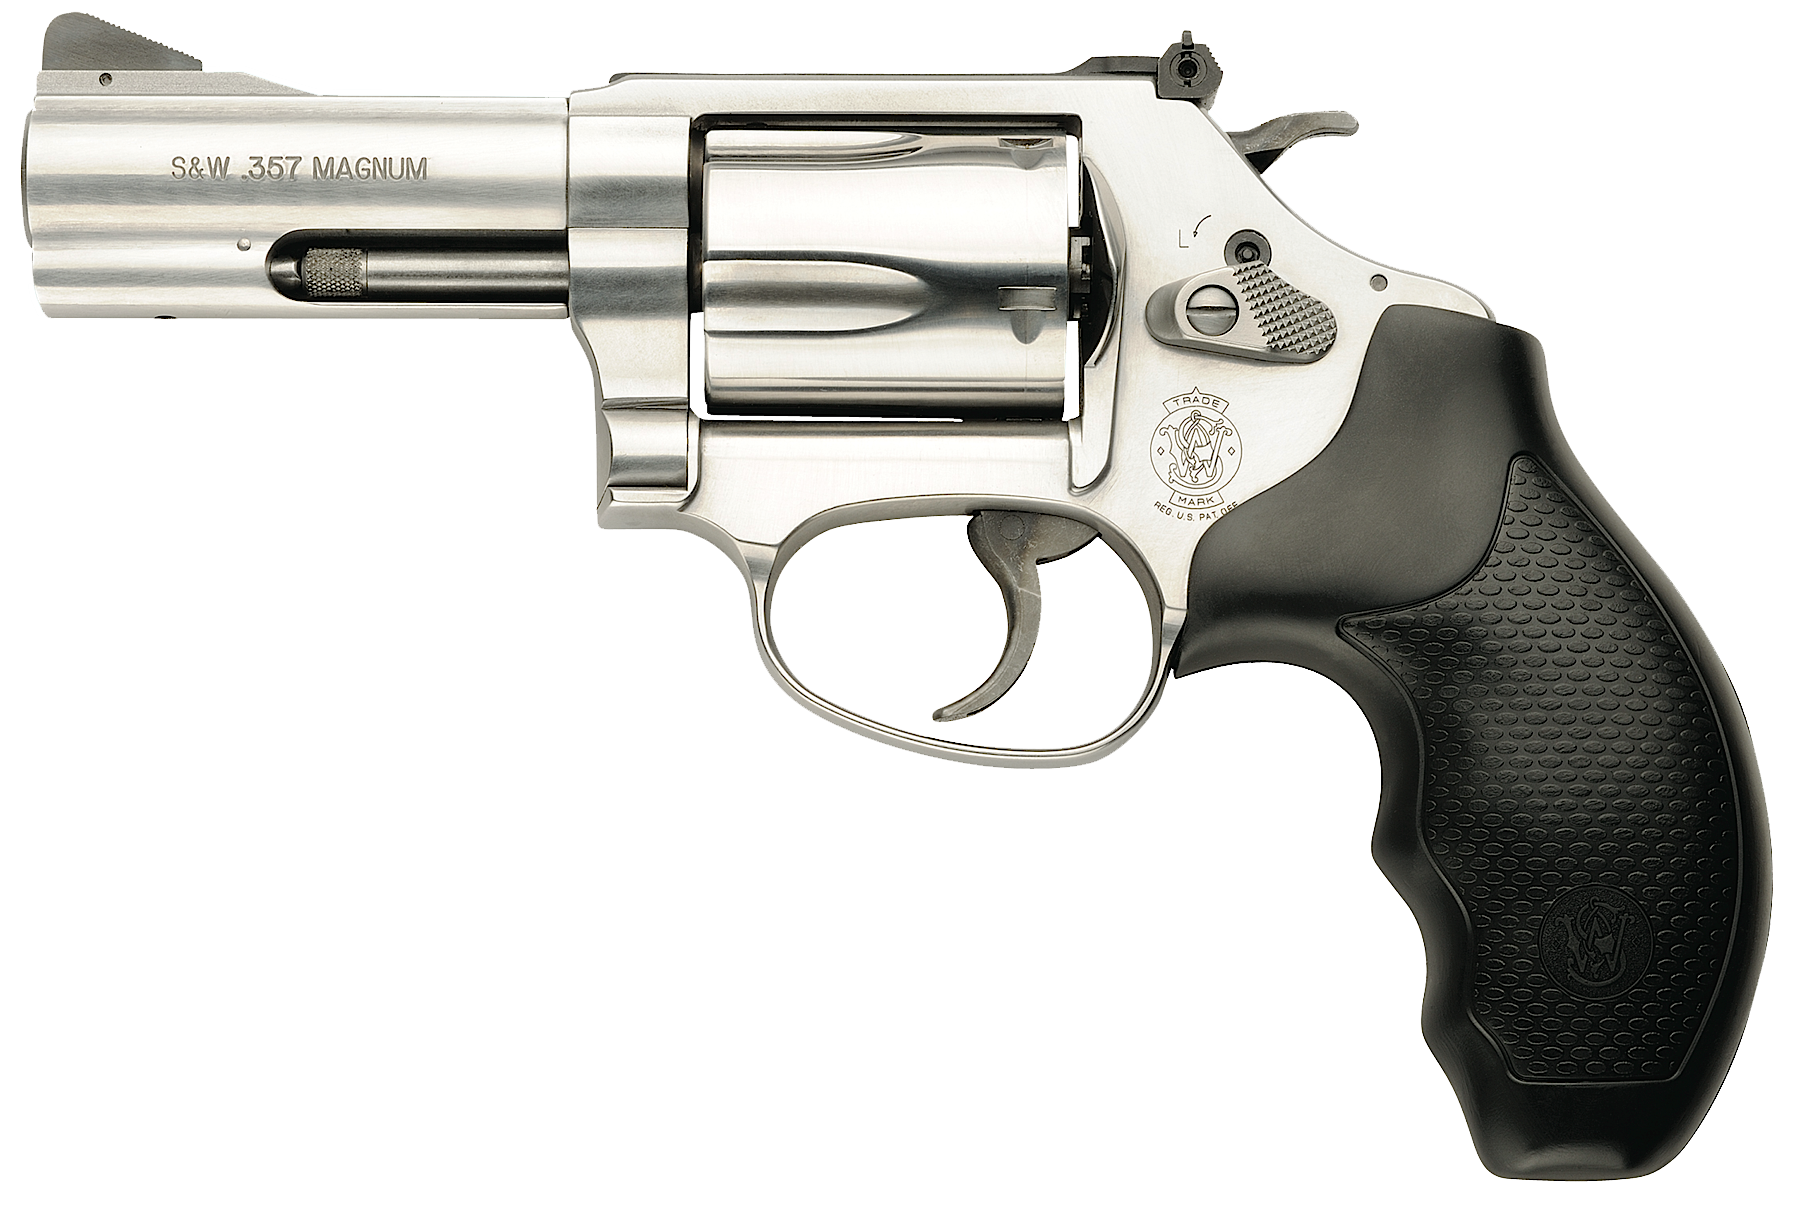 https://cityarsenal.com/product/smith-wesson-60-357-magnum-revolver-stainless-steel-2/